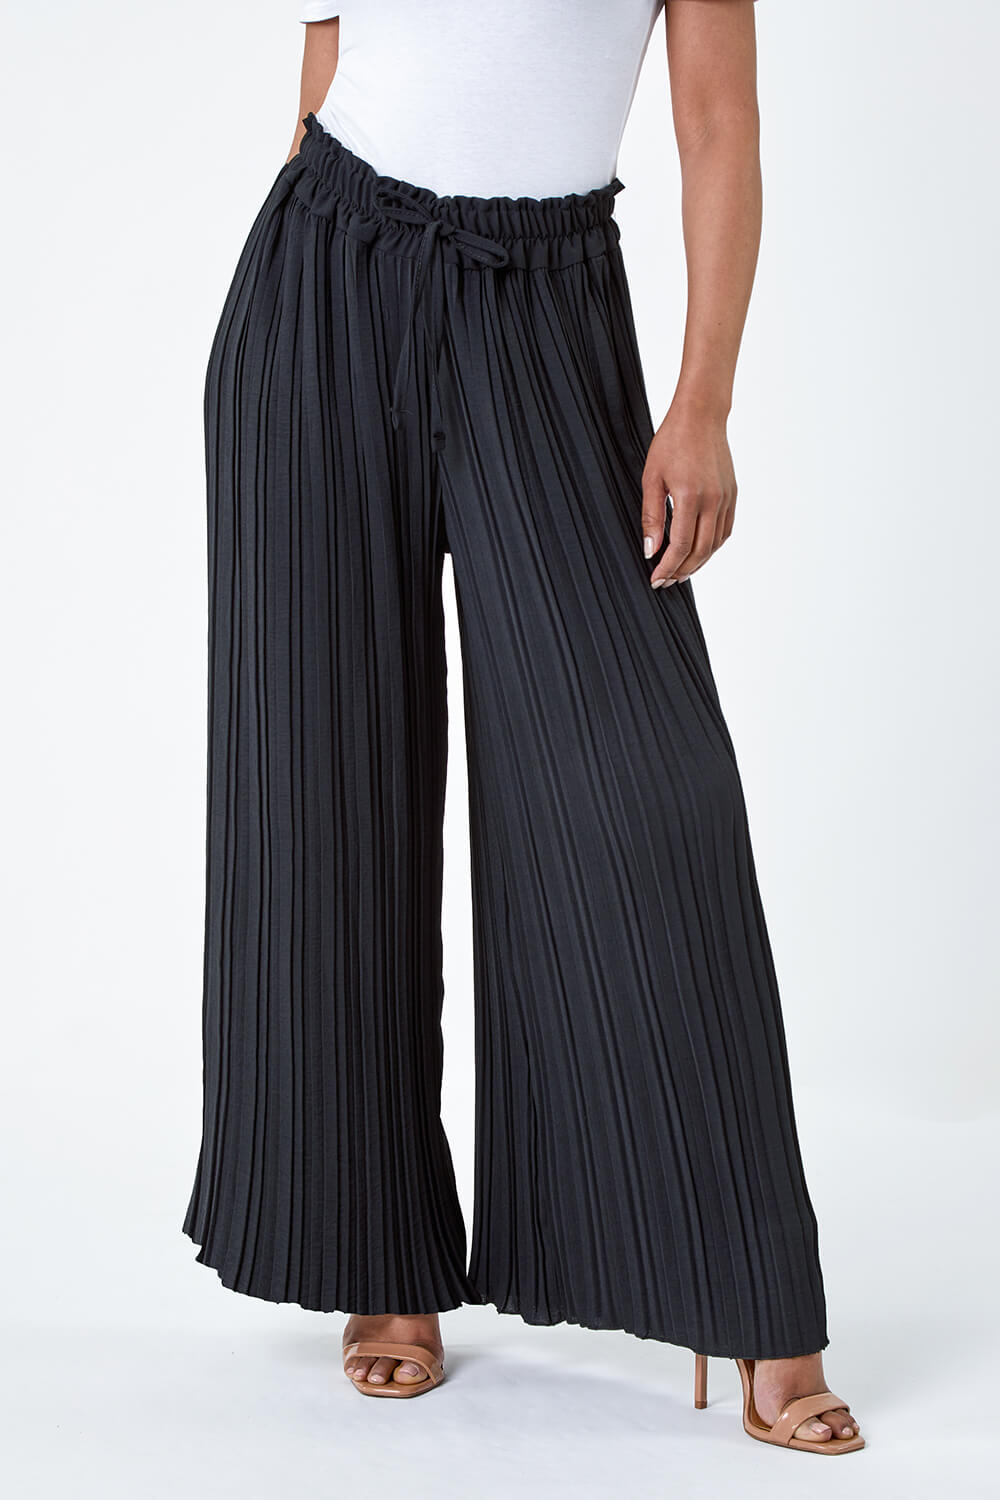 Black Petite Pleated Wide Leg Trousers, Image 4 of 5